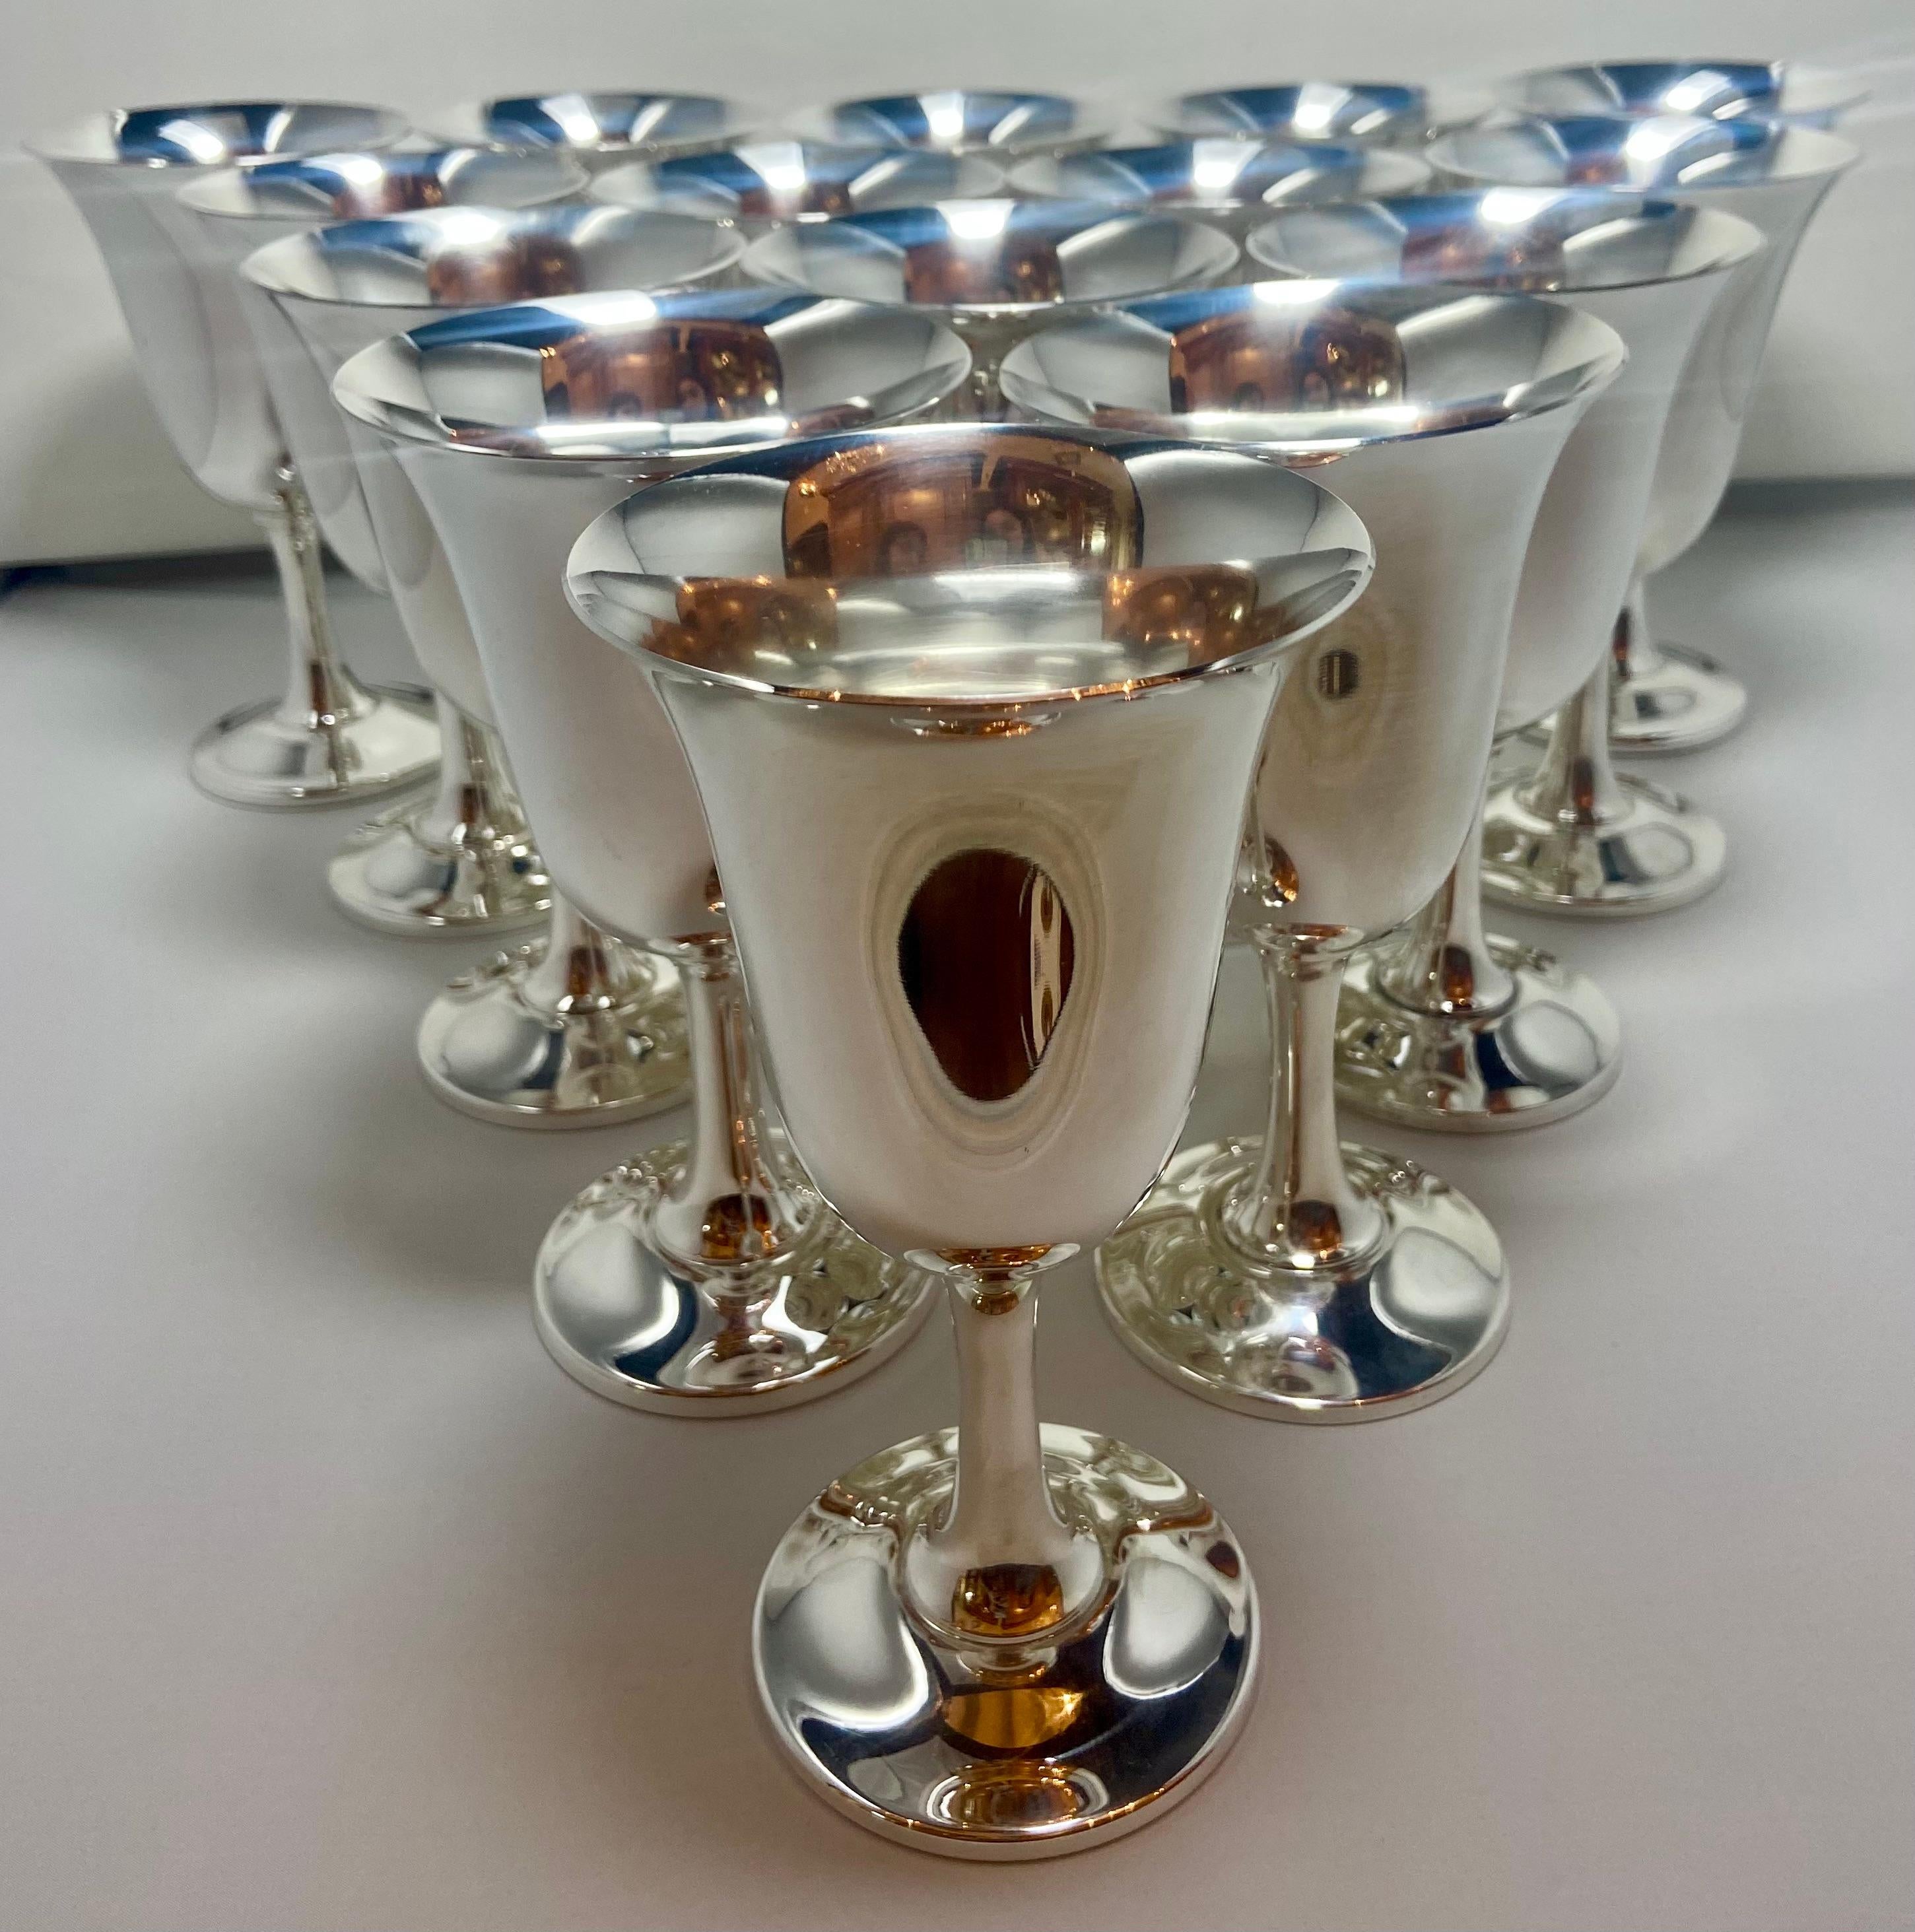 Set of 16 Estate American sterling silver wine/water goblets made by 